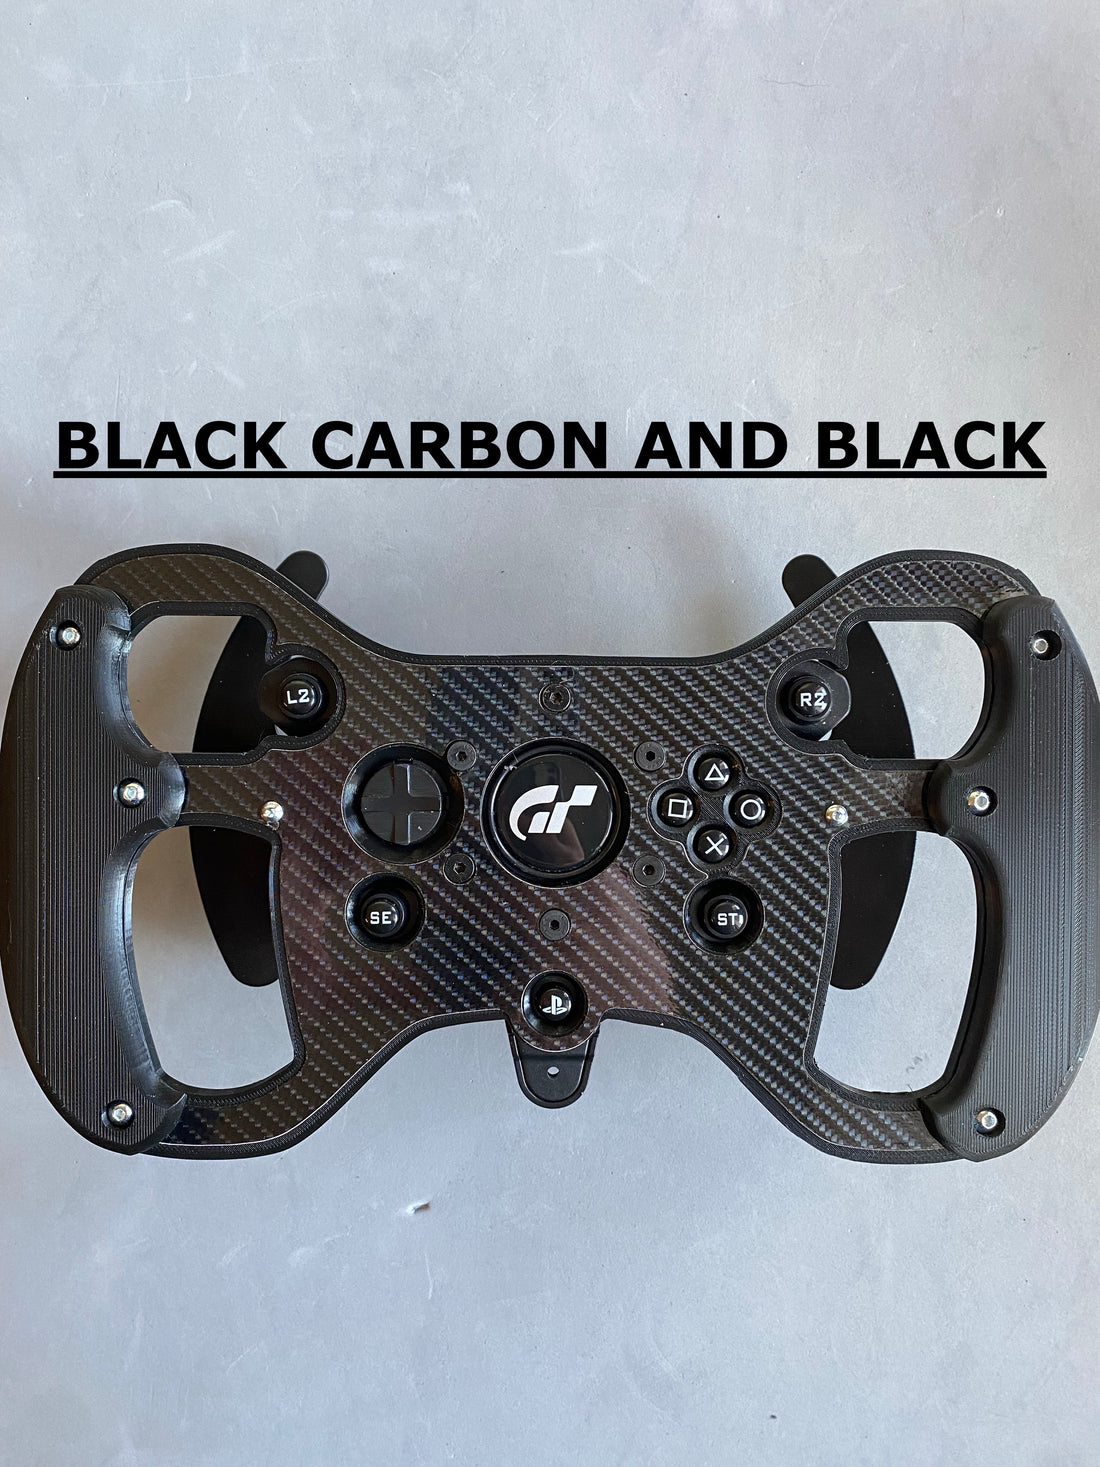 New Alcantara F1 Open Wheel Mod for Thrustmaster T300, different colors